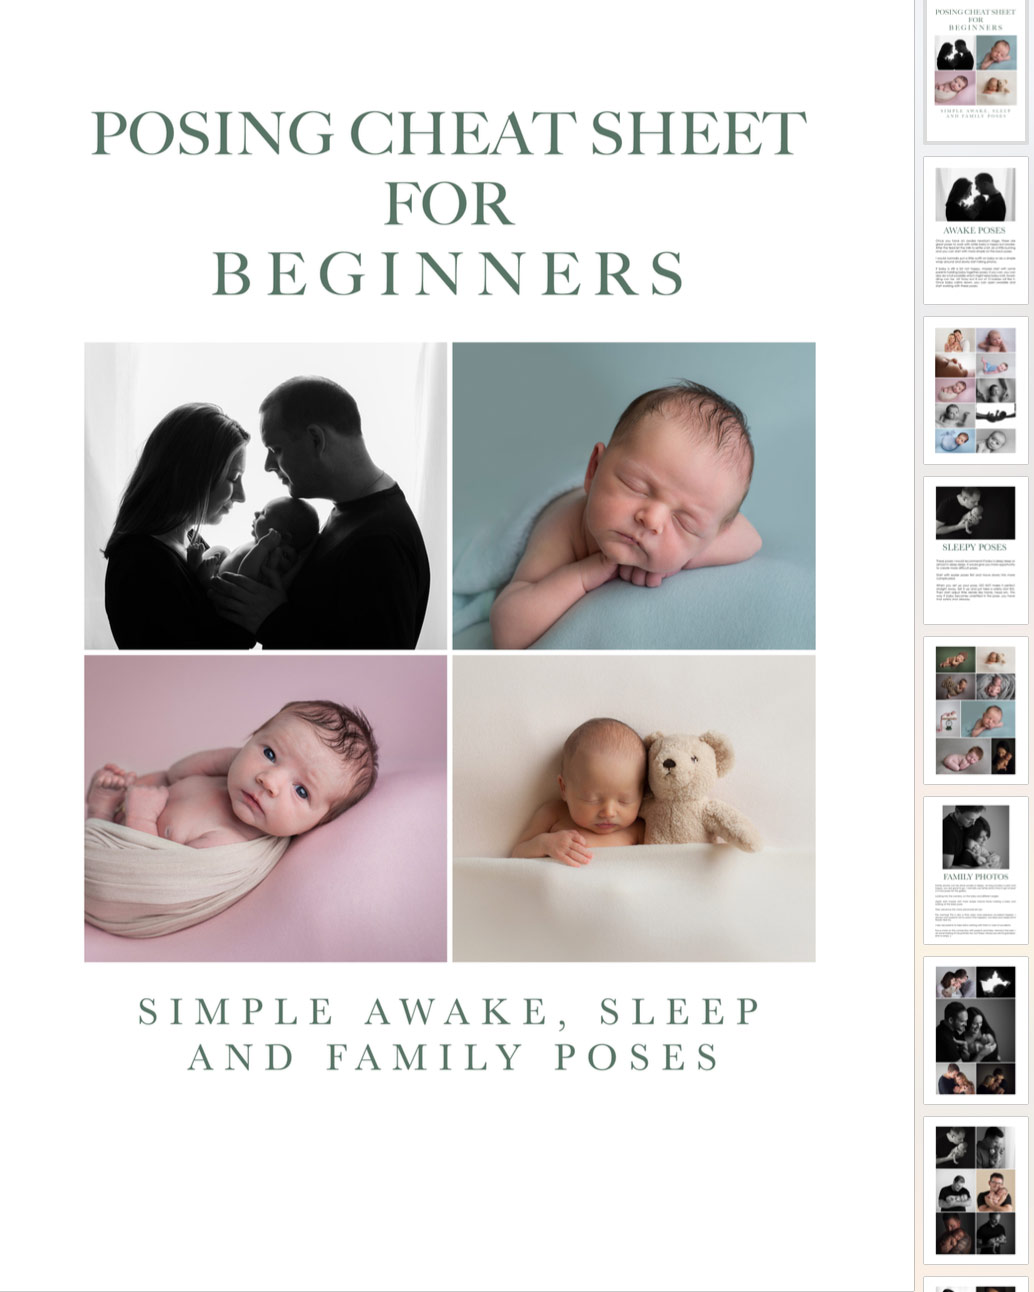 How to get the most out of a single newborn pose